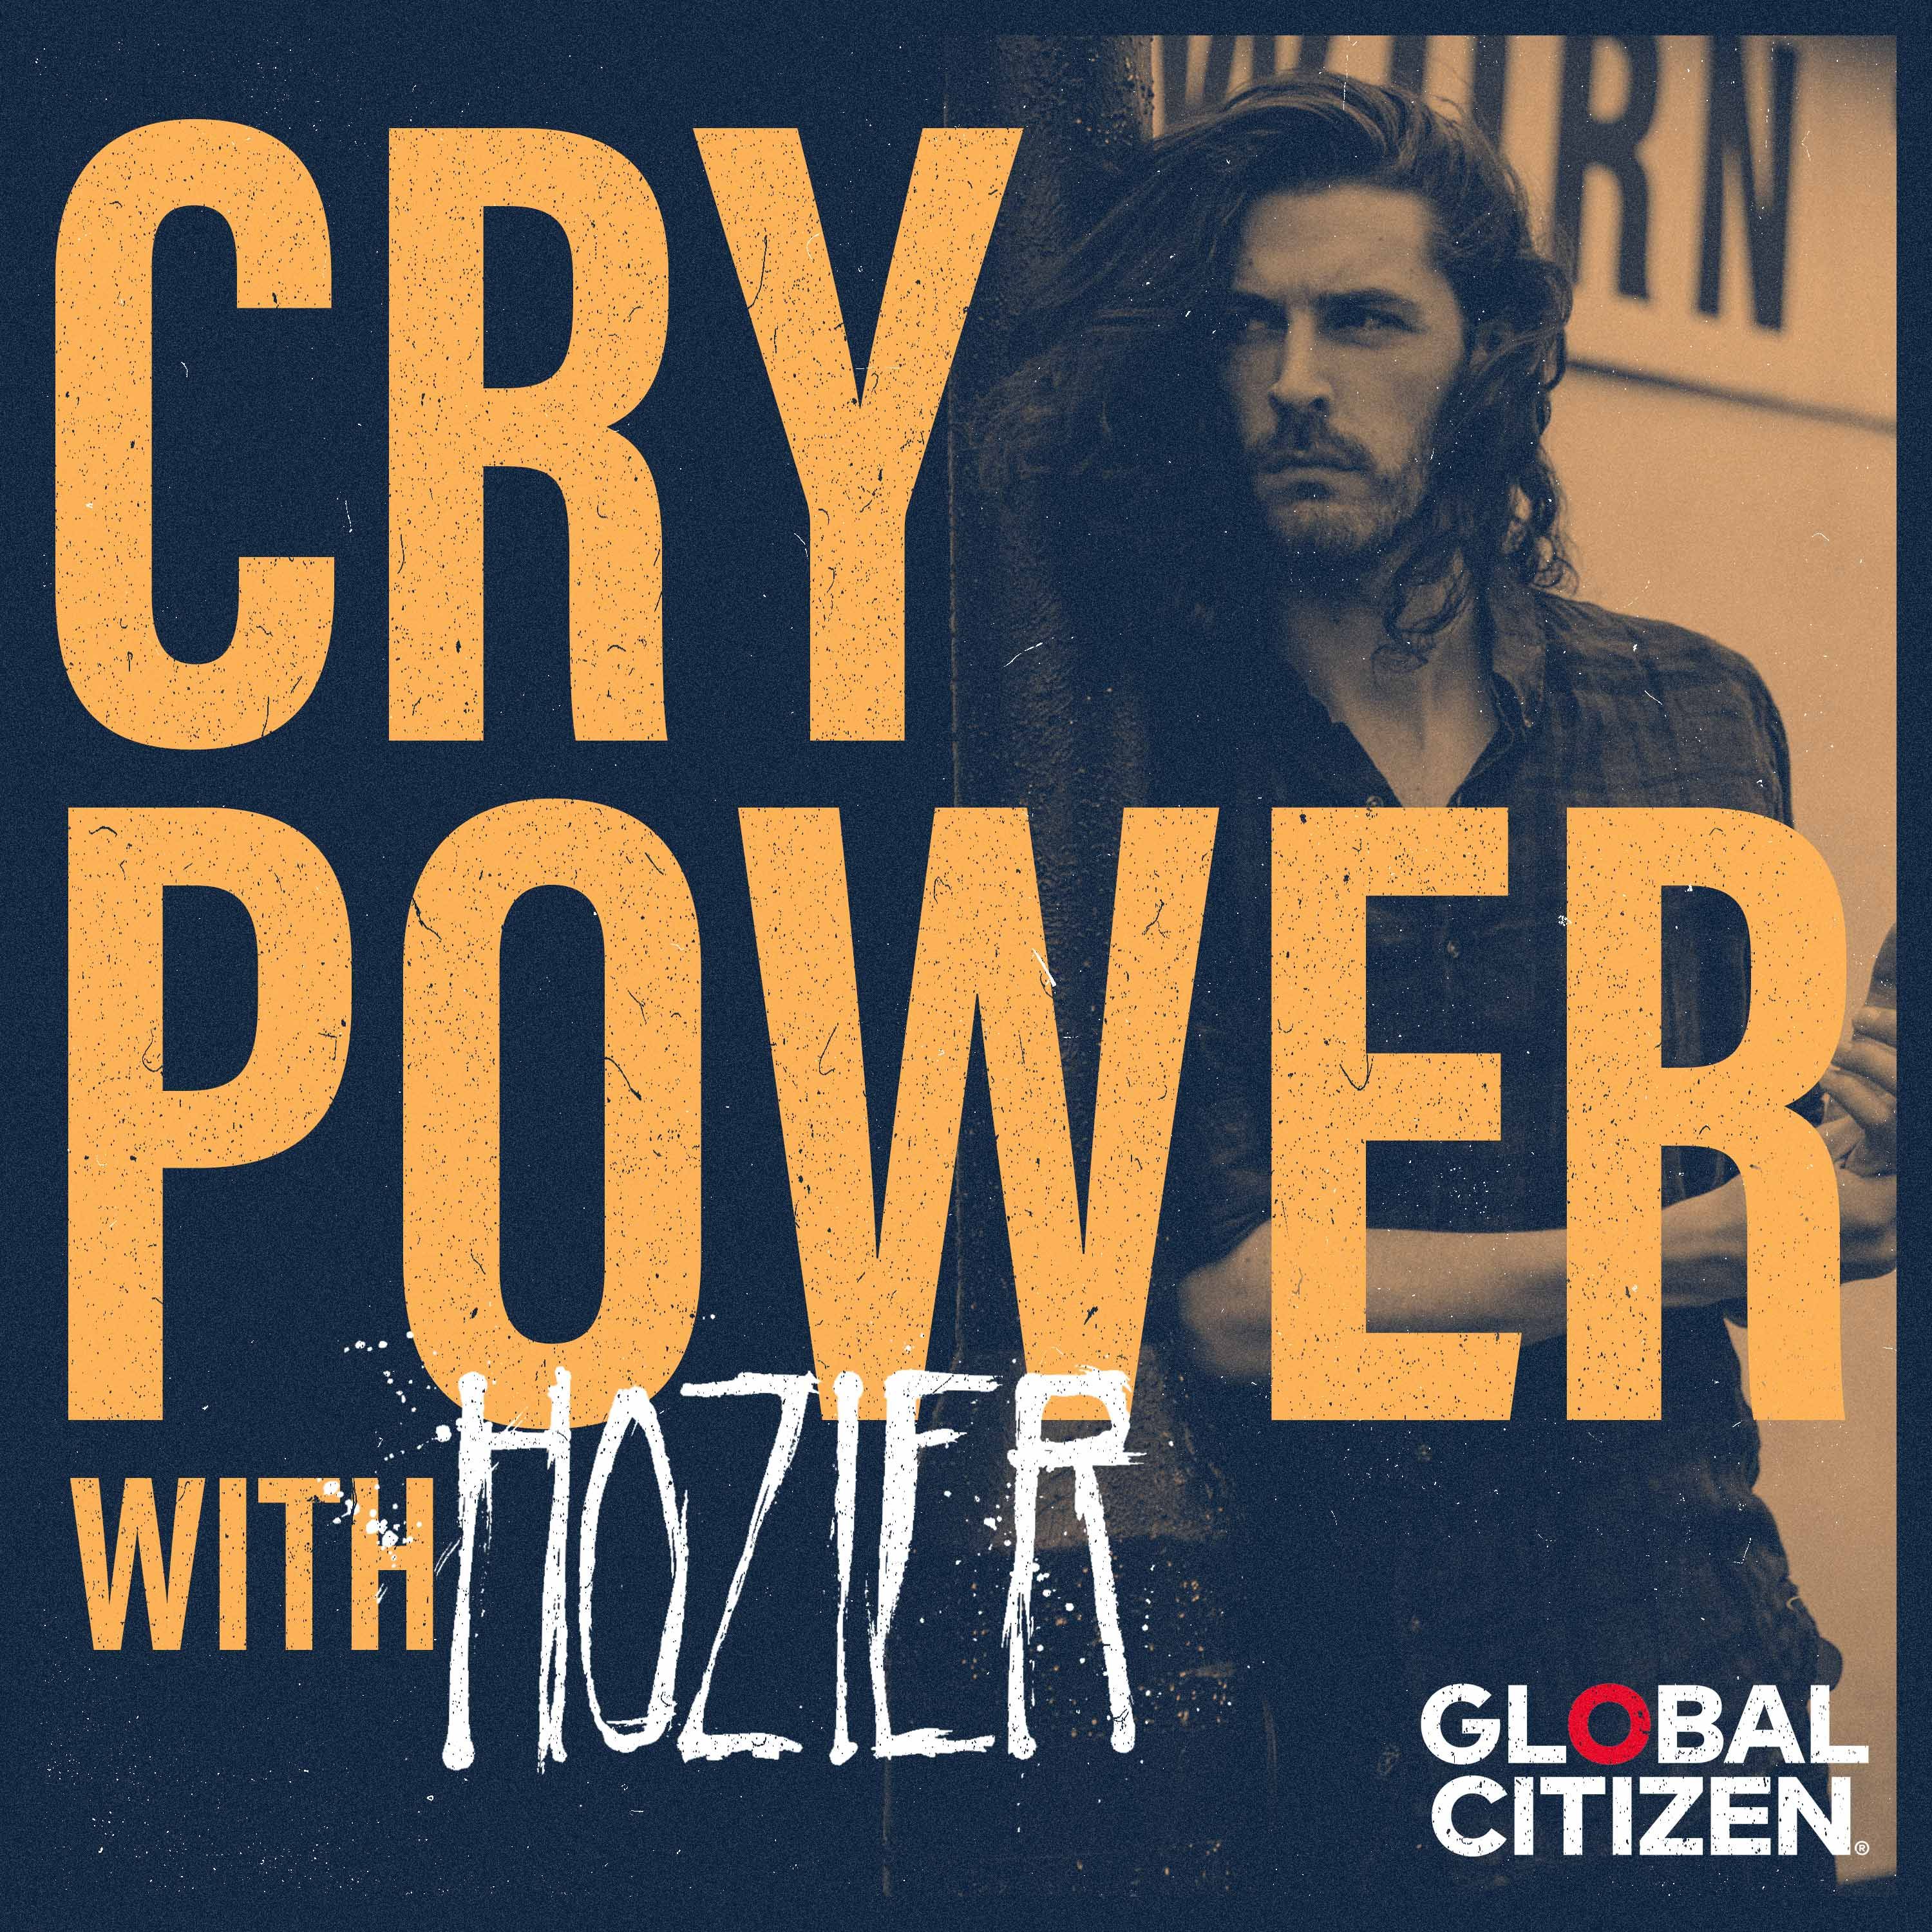 Cry Power Podcast with Hozier and Global Citizen Season 1 Trailer